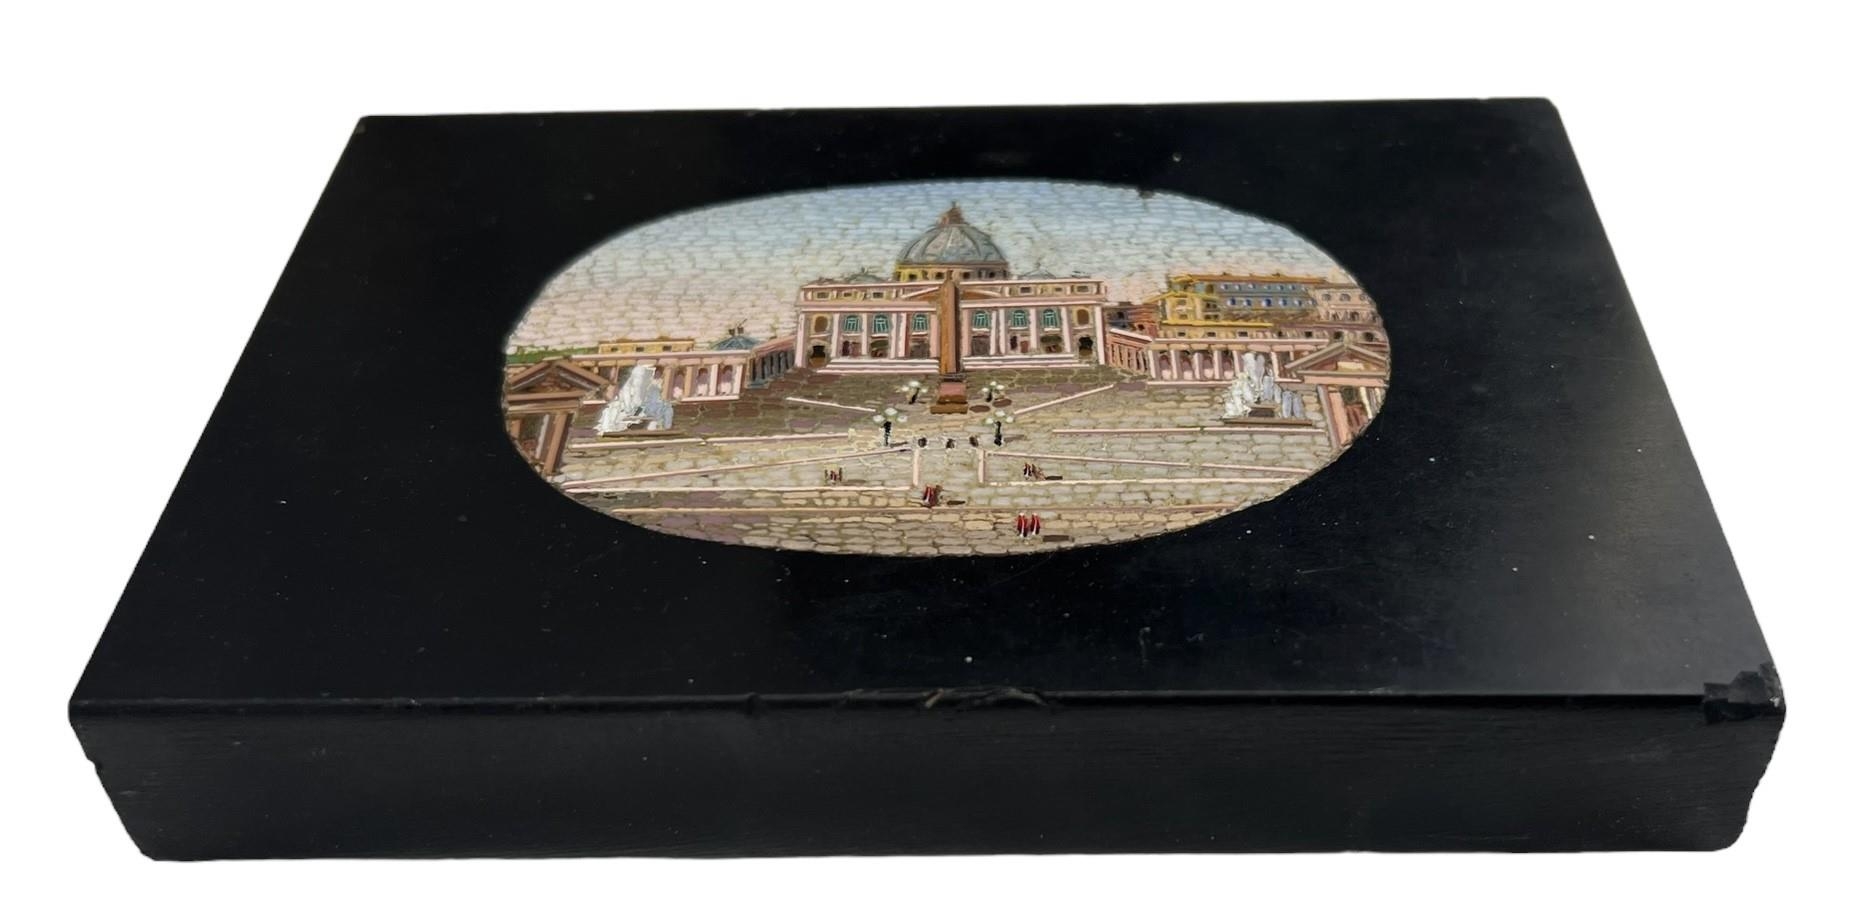 A 19TH CENTURY ITALIAN GRAND TOUR MICRO MOSAIC PAPERWEIGHT St. Peter's Basilica and Square set - Image 2 of 3